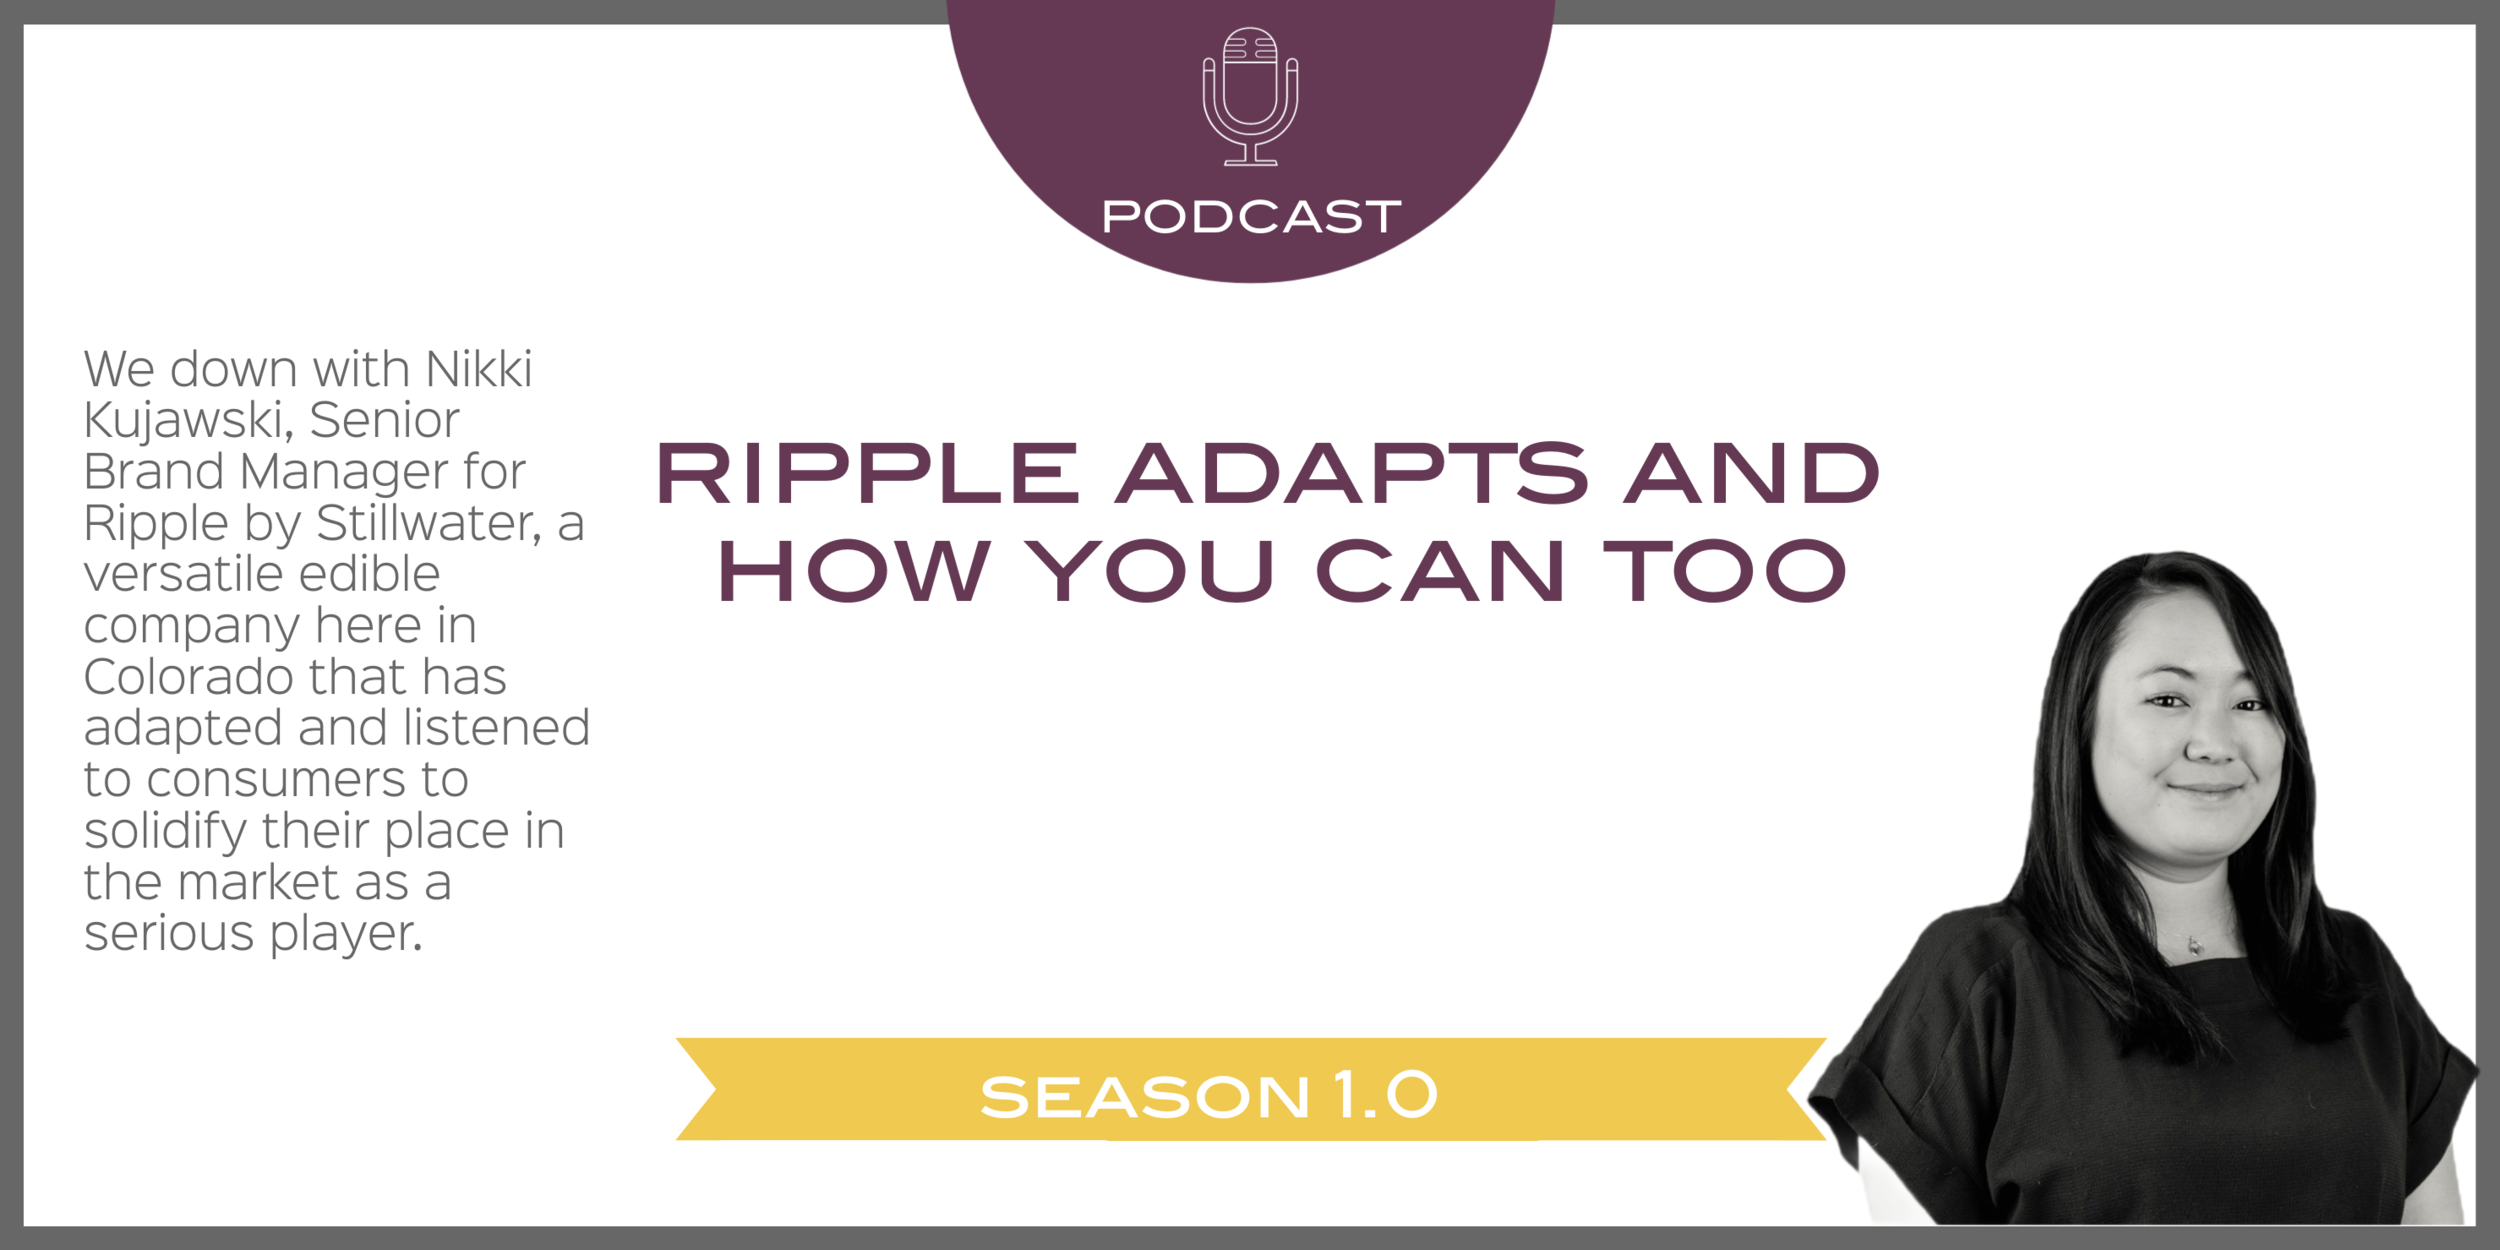 Nikki Kujawski of Ripple discusses adapting your brand to fill gaps in the market